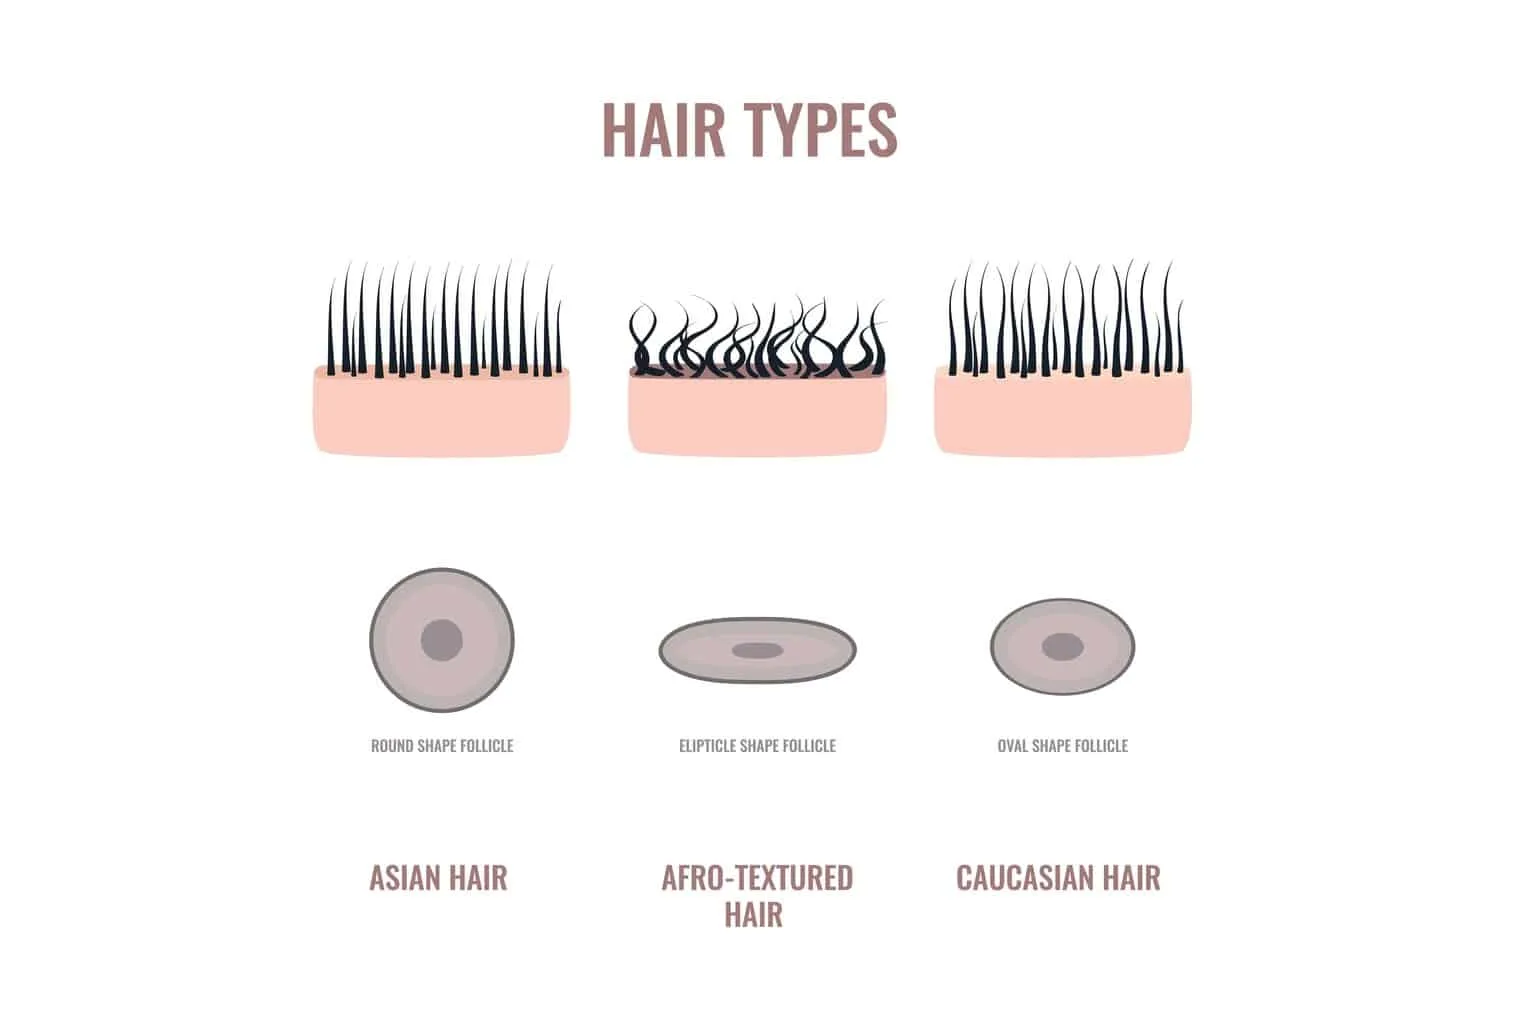 Asian Hair Vs. Caucasian Hair: How Are They Different?